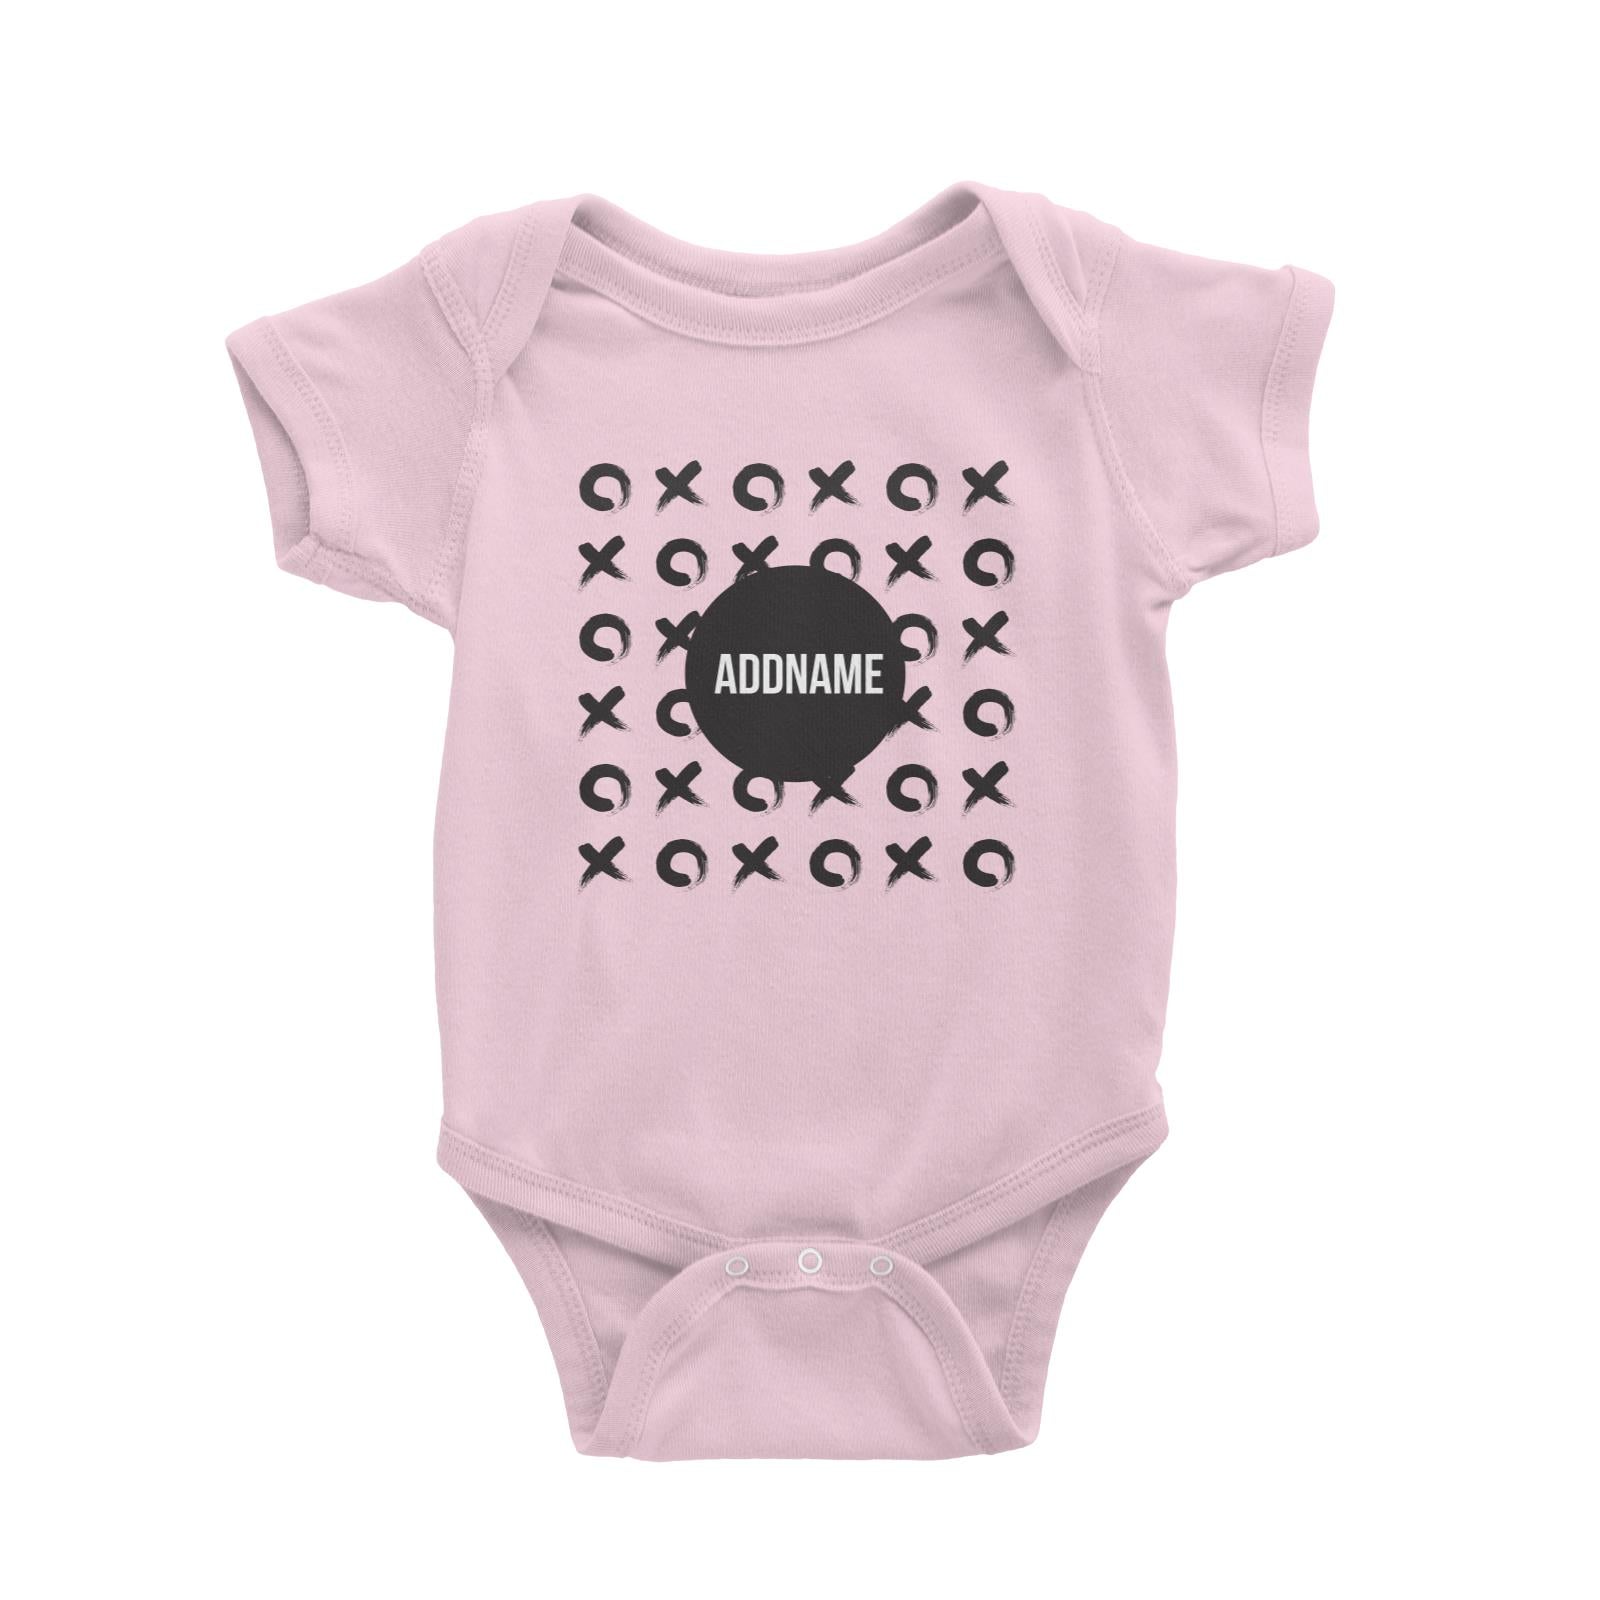 Monochrome Black Tic Tac Toe with Addname Baby Romper